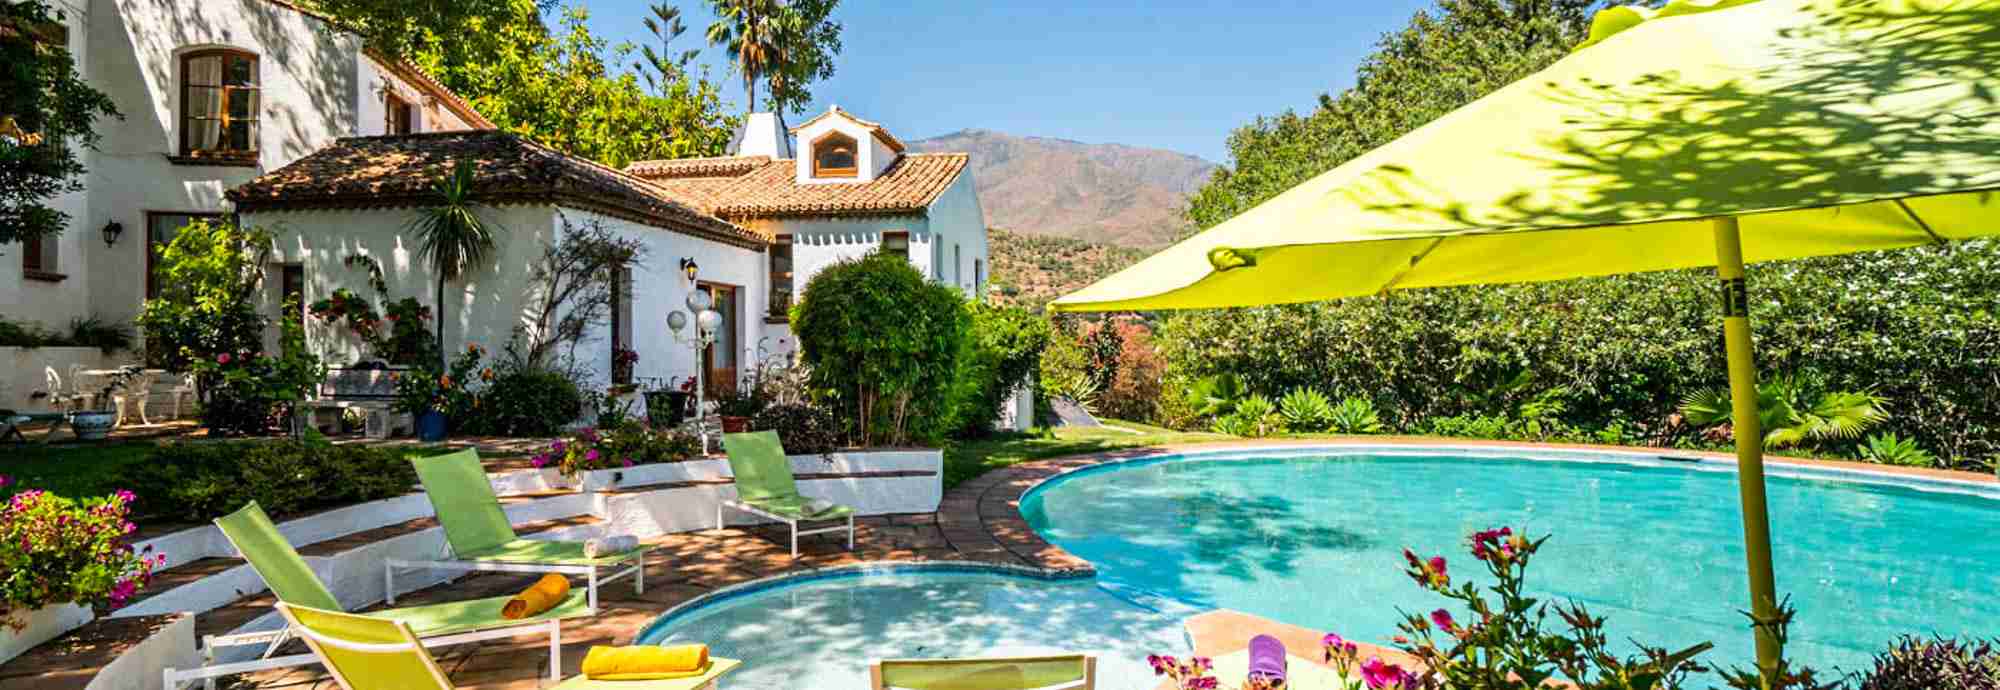 Garden villa with lovely pool in green Andalucia valley near coast